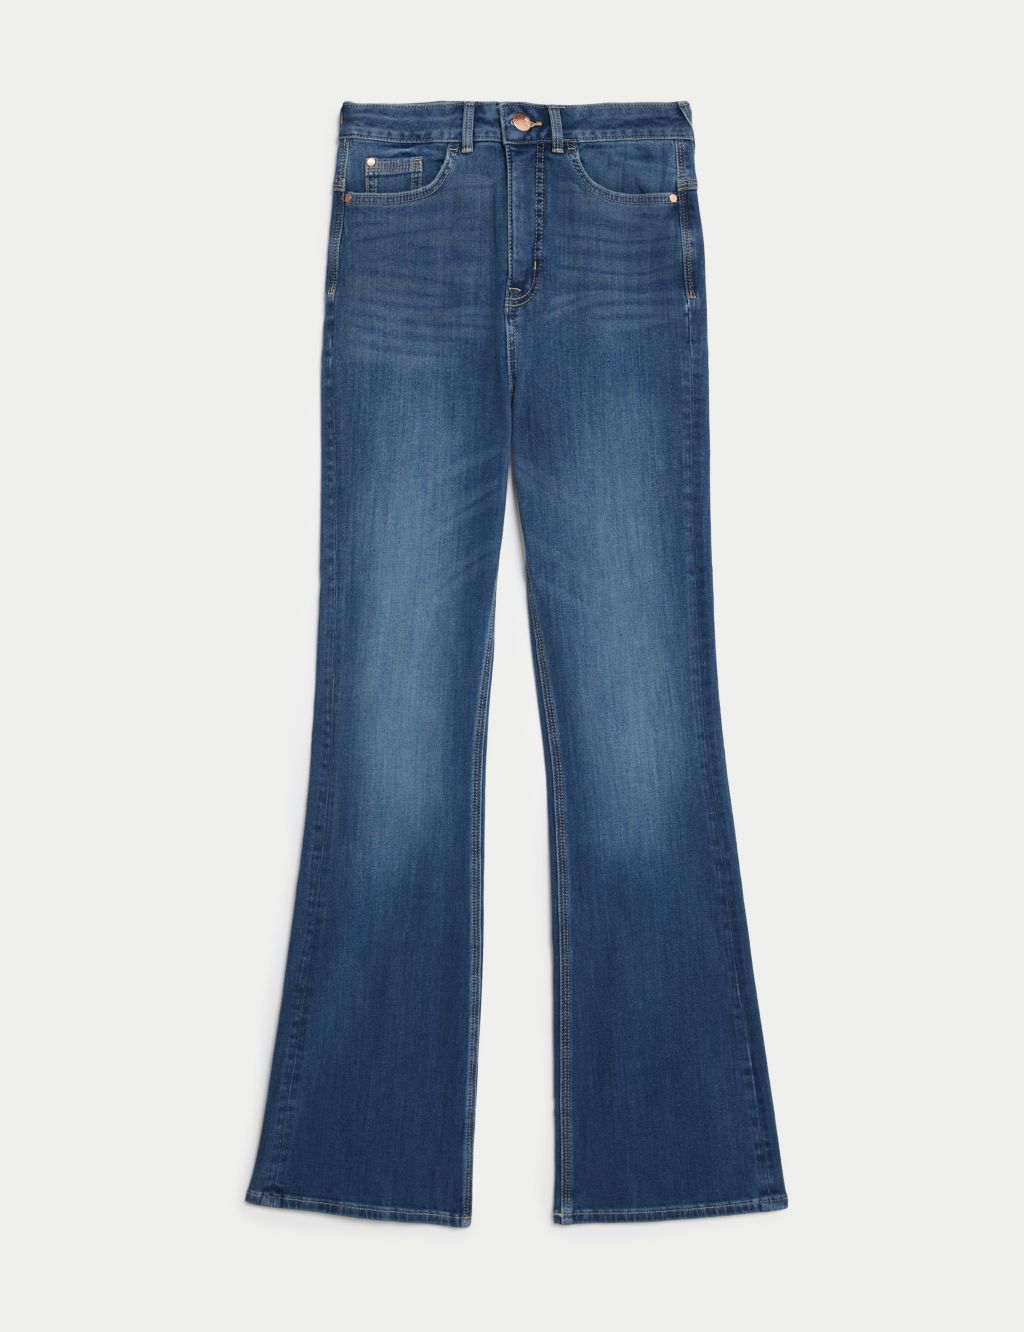 Magic Shaping High Waisted Slim Flare Jeans image 1